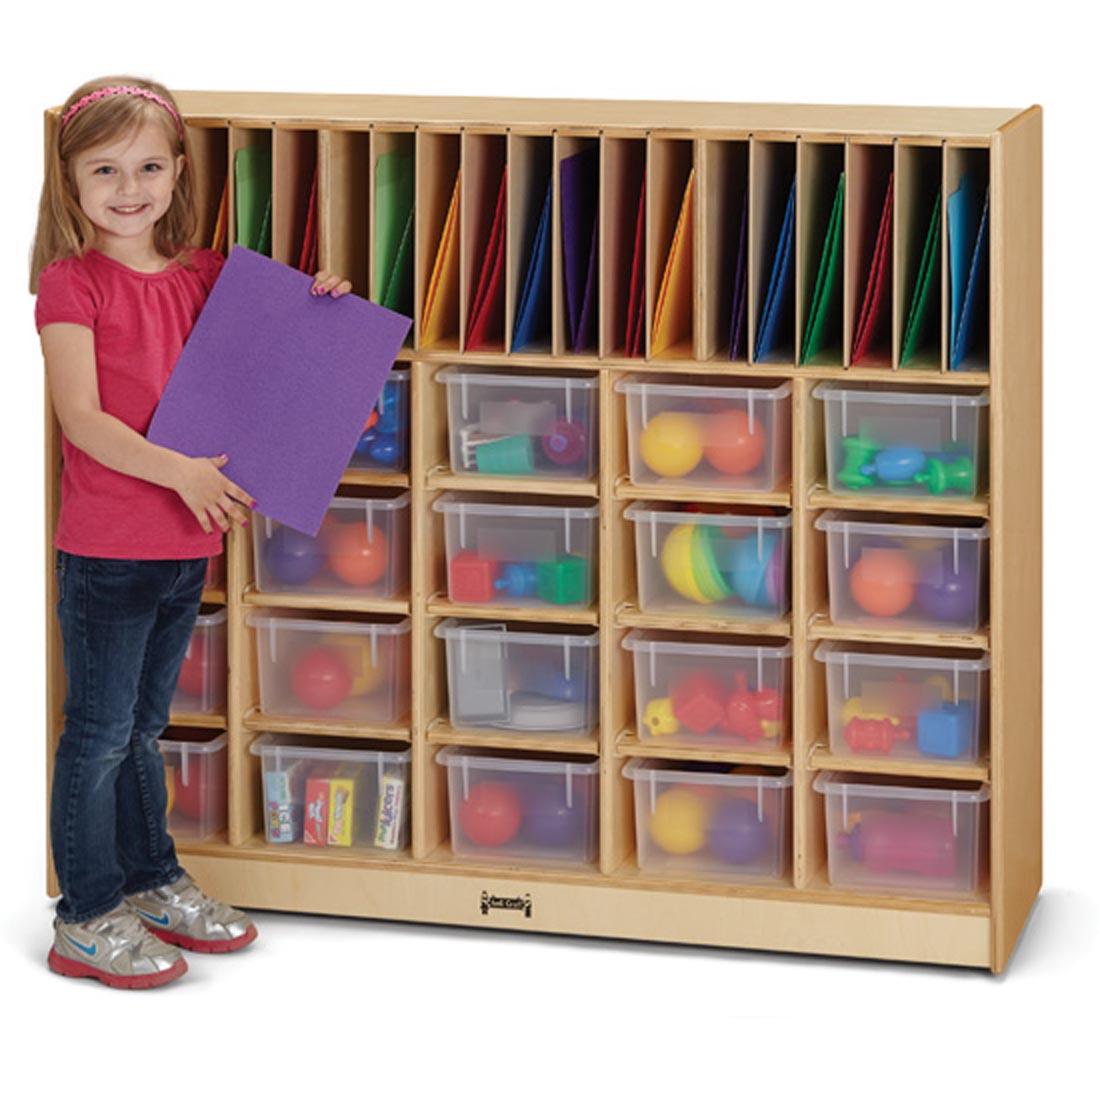 Child standing next to the Classroom Organizer With Clear Trays shown with suggested storage contents